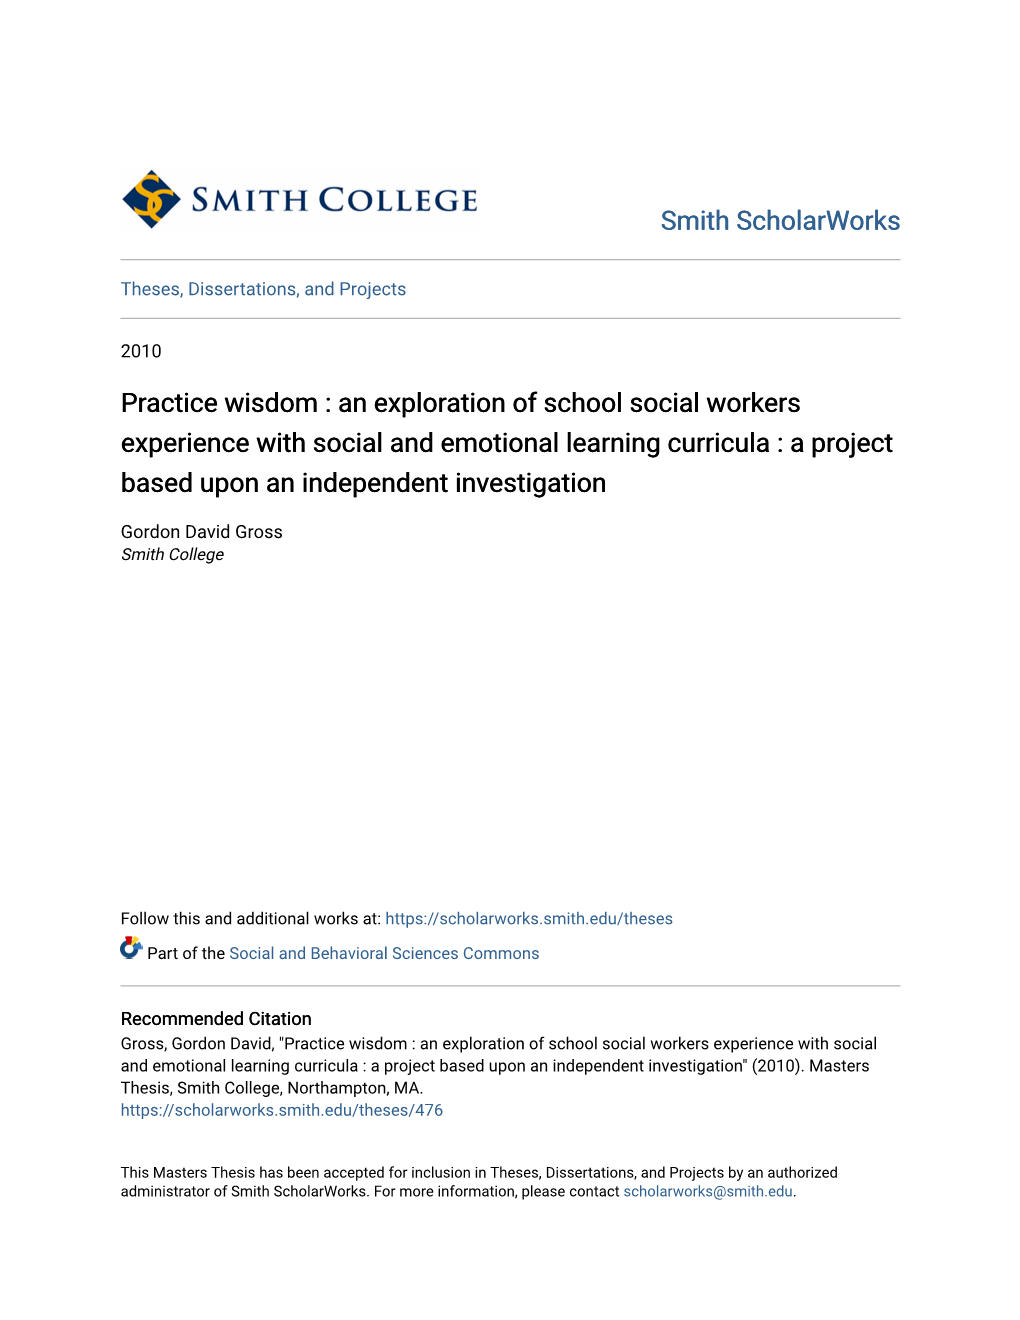 Practice Wisdom : an Exploration of School Social Workers Experience with Social and Emotional Learning Curricula : a Project Based Upon an Independent Investigation